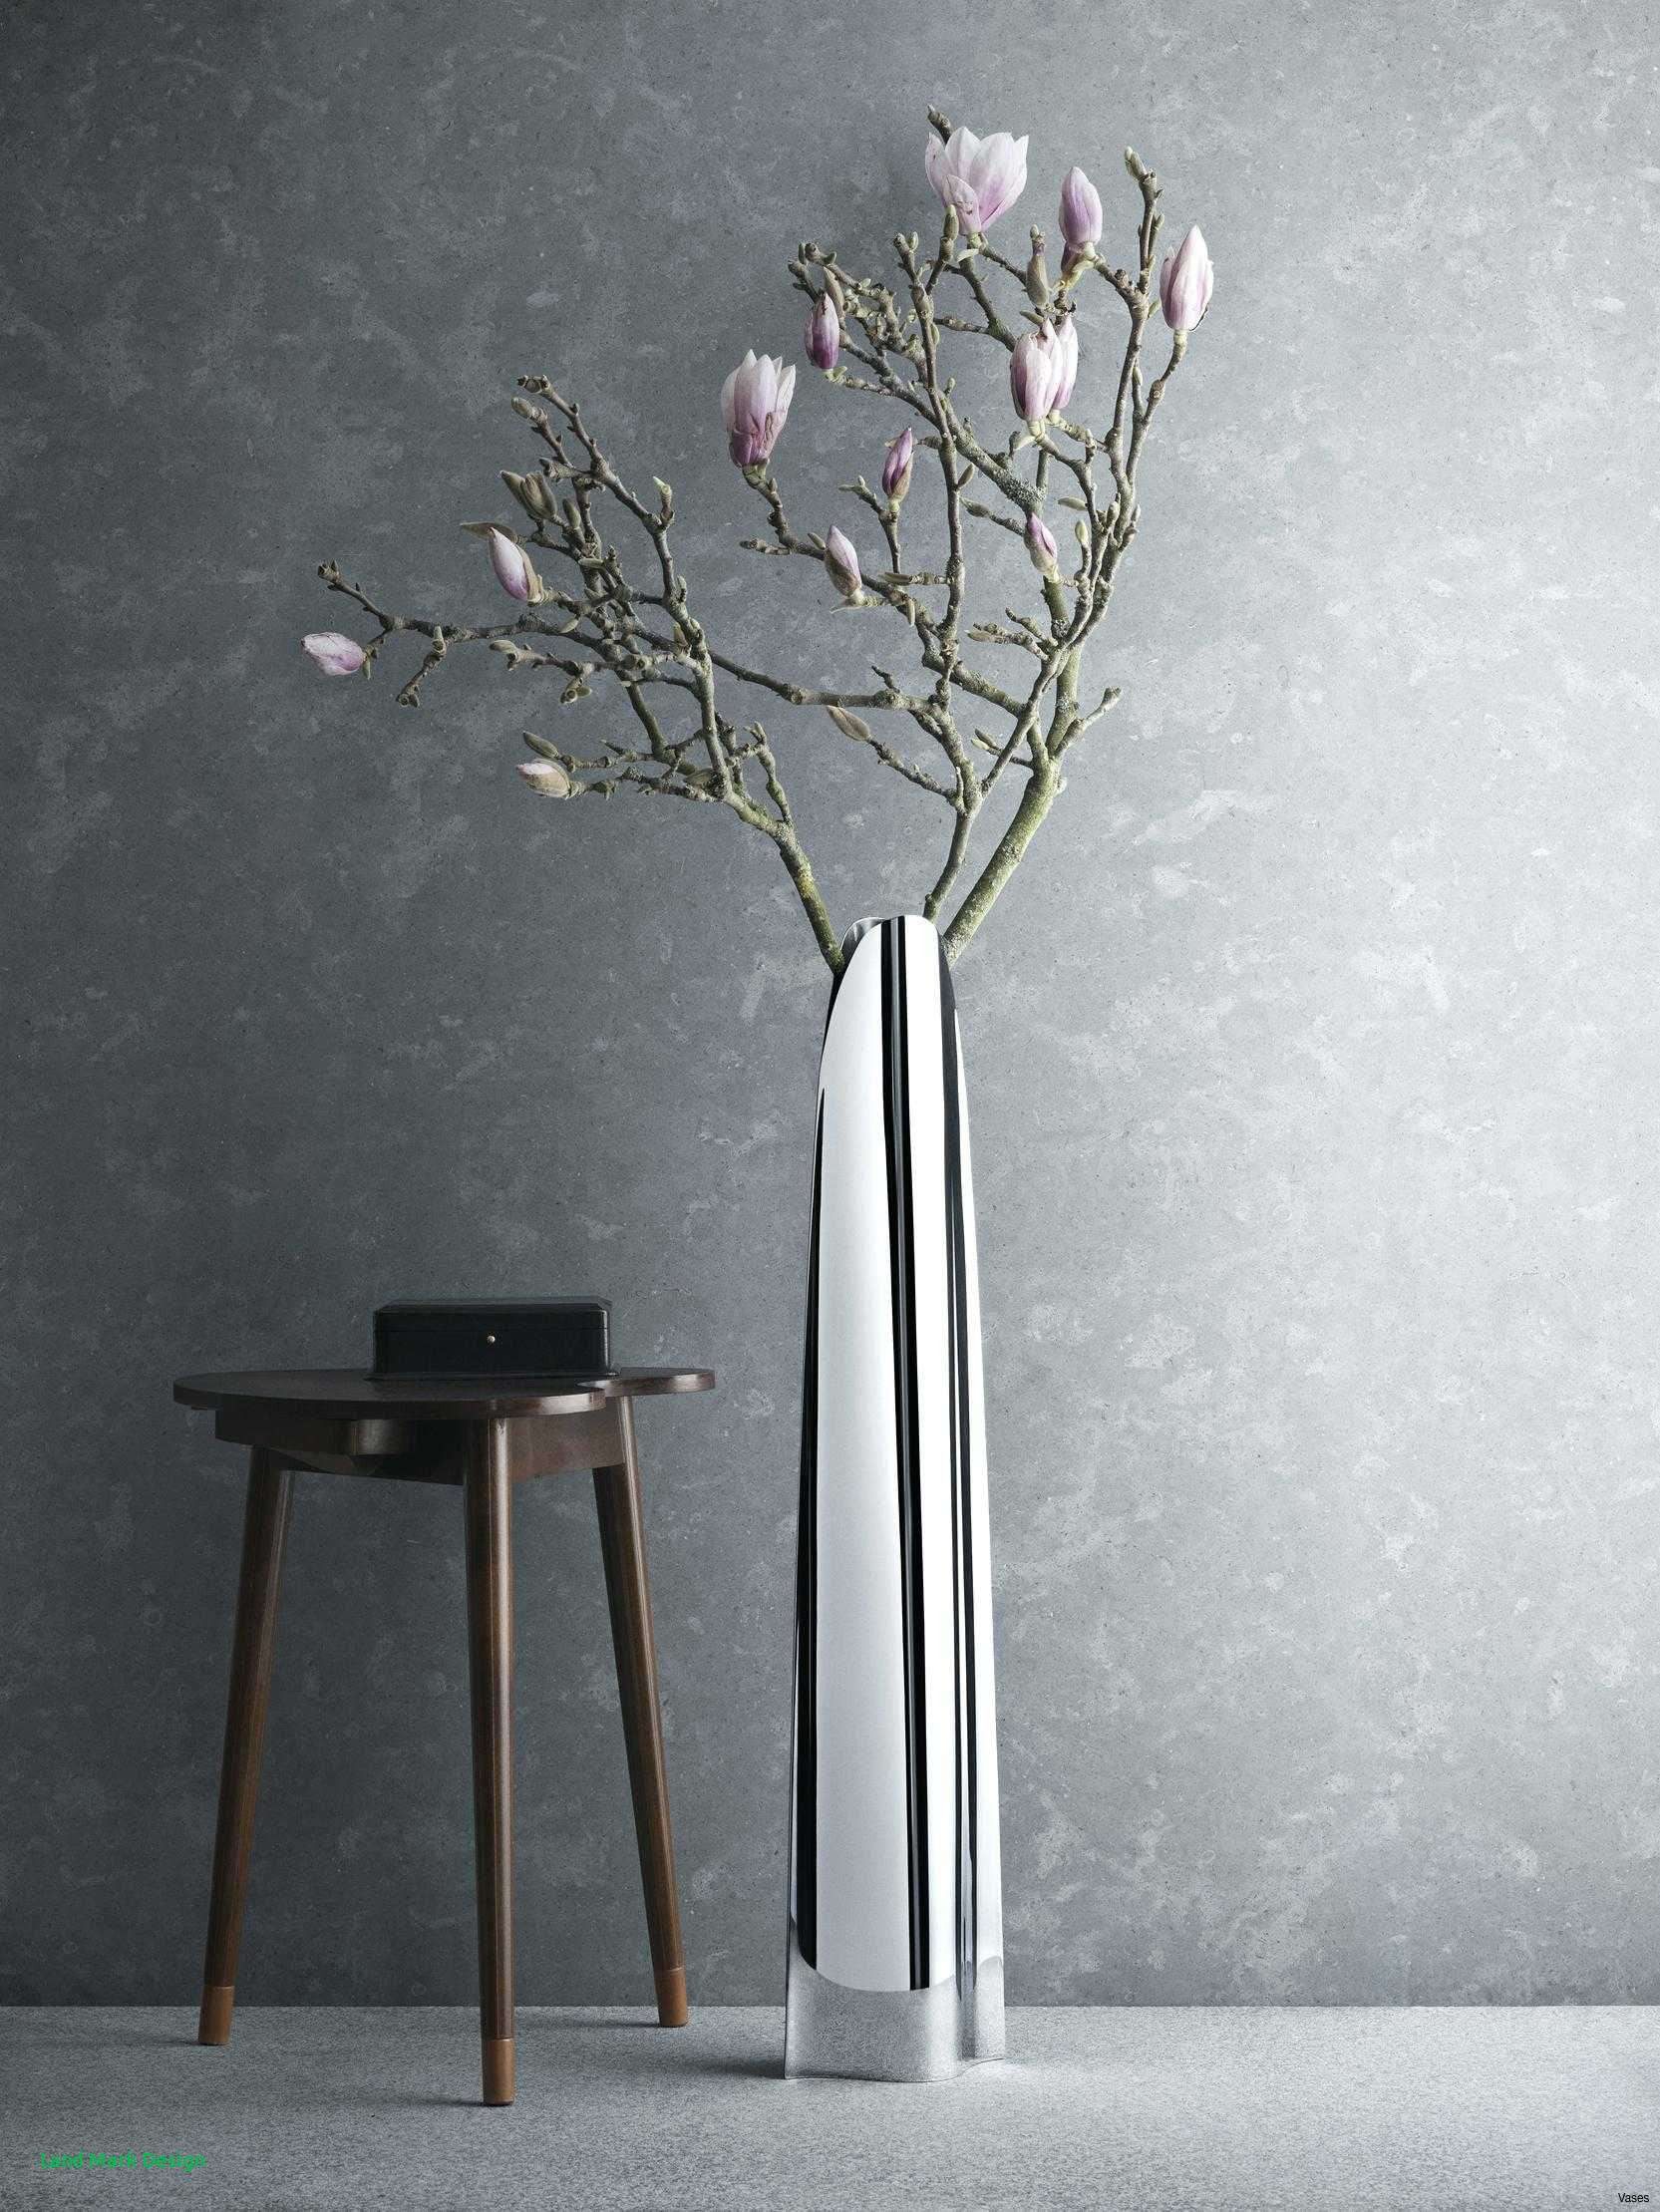 18 Great White Twigs for Vases 2024 free download white twigs for vases of floor vase branches pictures vases vase with twigs red sticks in a i for floor vase branches image tall vase with branches design of floor vase branches pictures vas